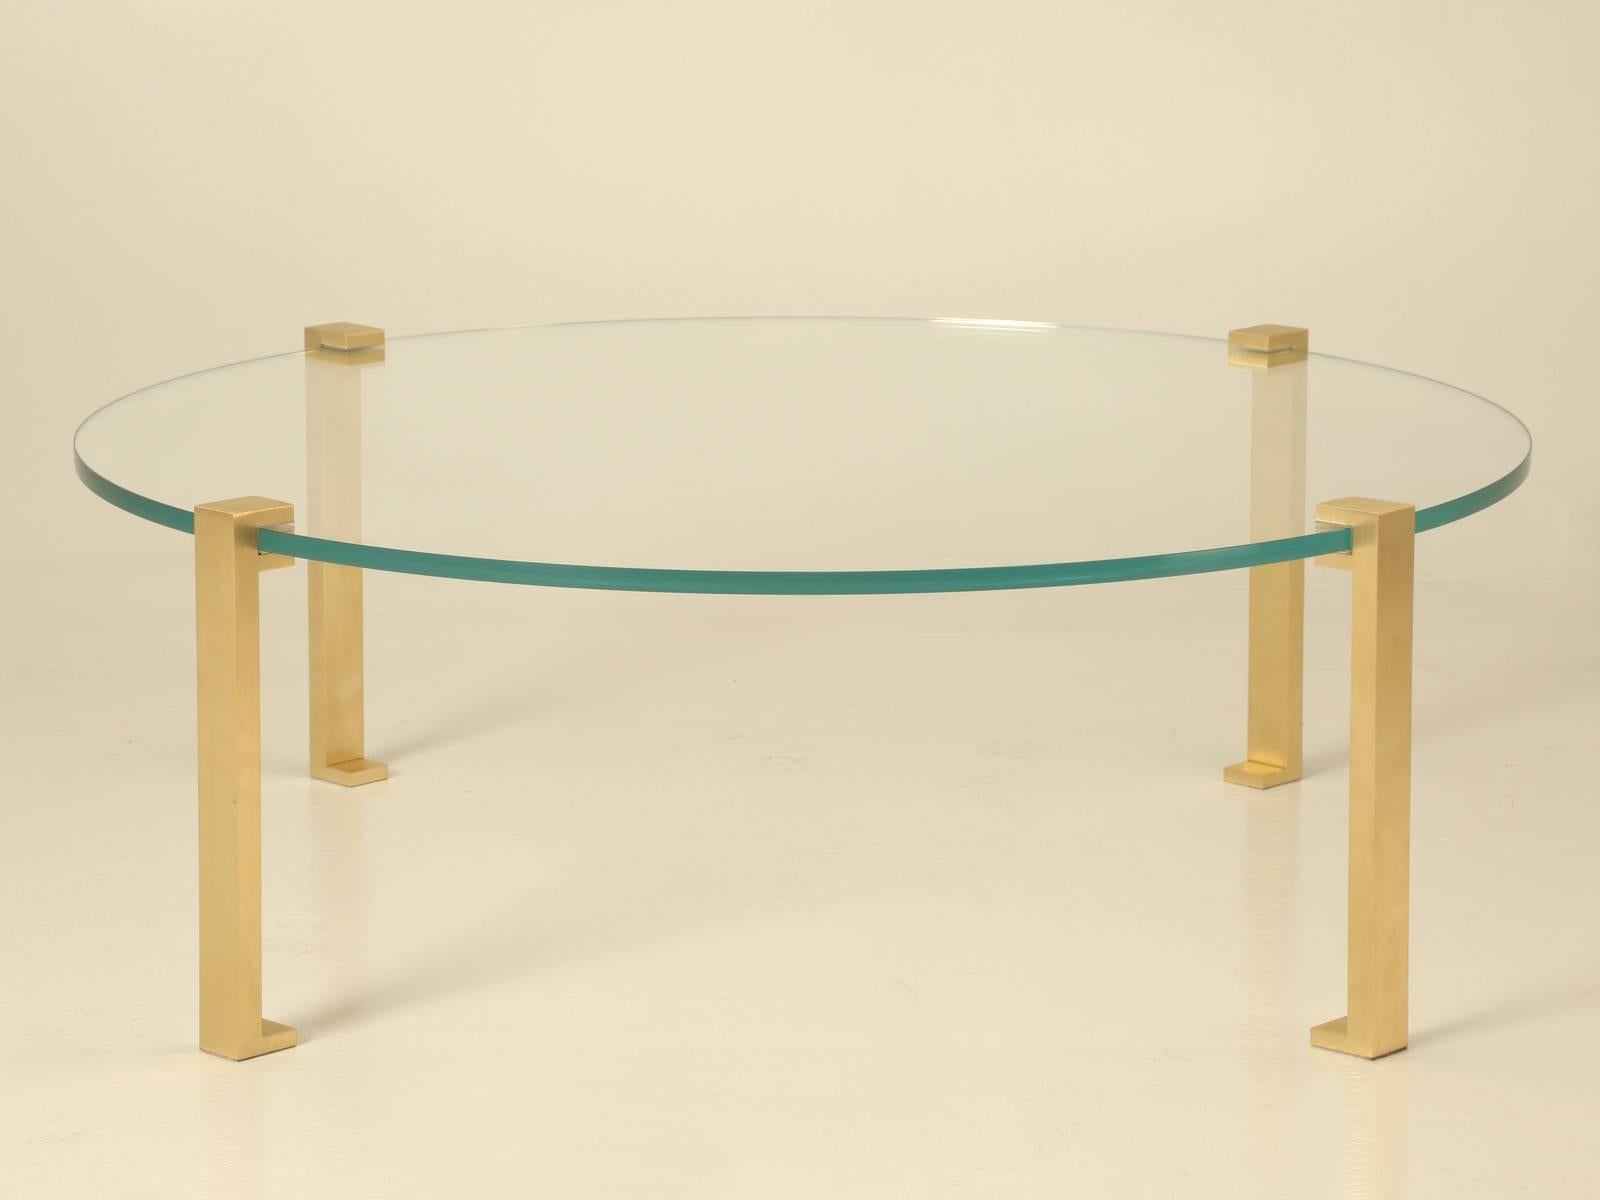 Mid-Century Modern coffee table that we manufacture in any diameter you chose and although this one has solid polished brass legs, optionally, you could spec; bronze, chrome, stainless or nickel. The table shown is 51” in diameter and was made with